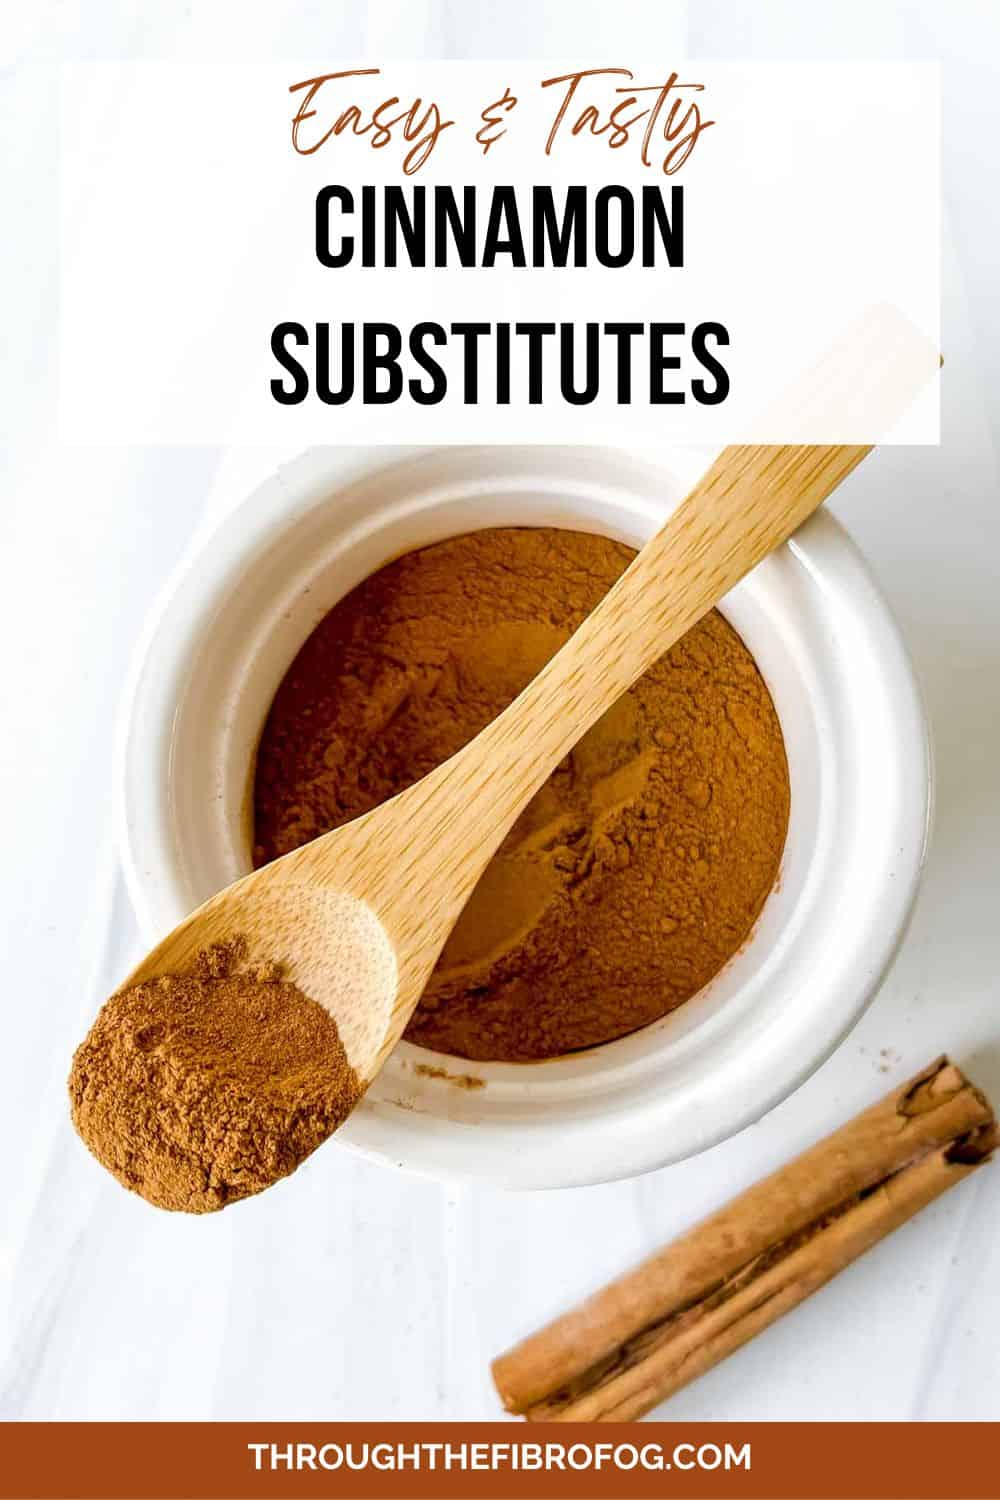 labelled easy and tasty cinnamon substitutes with a white bowl of cinnamon and a wooden spoon of cinnamon on top of it.